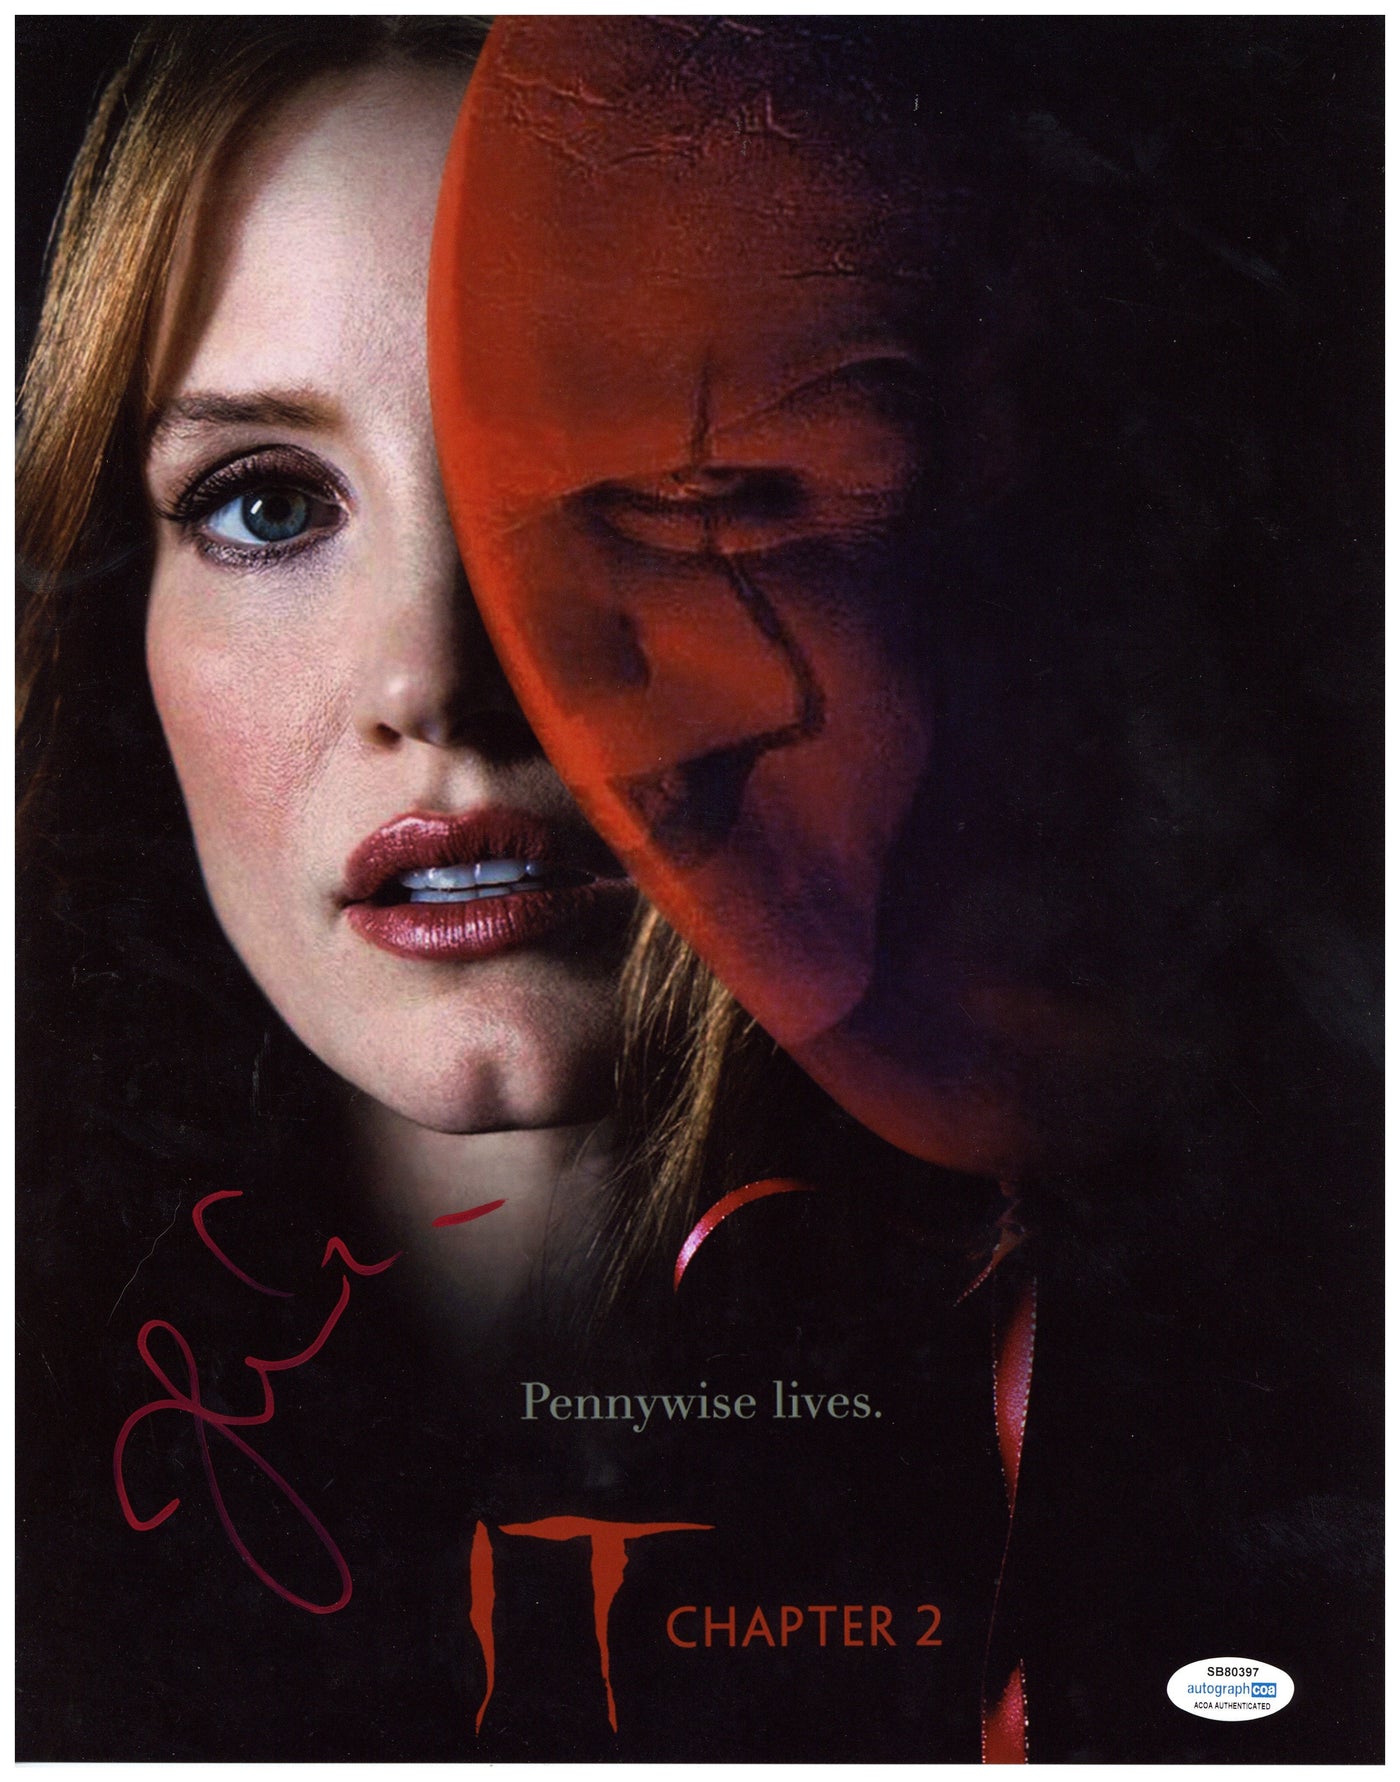 Jessica Chastain Signed 11x14 Photo IT Chapter 2 Autographed ACOA